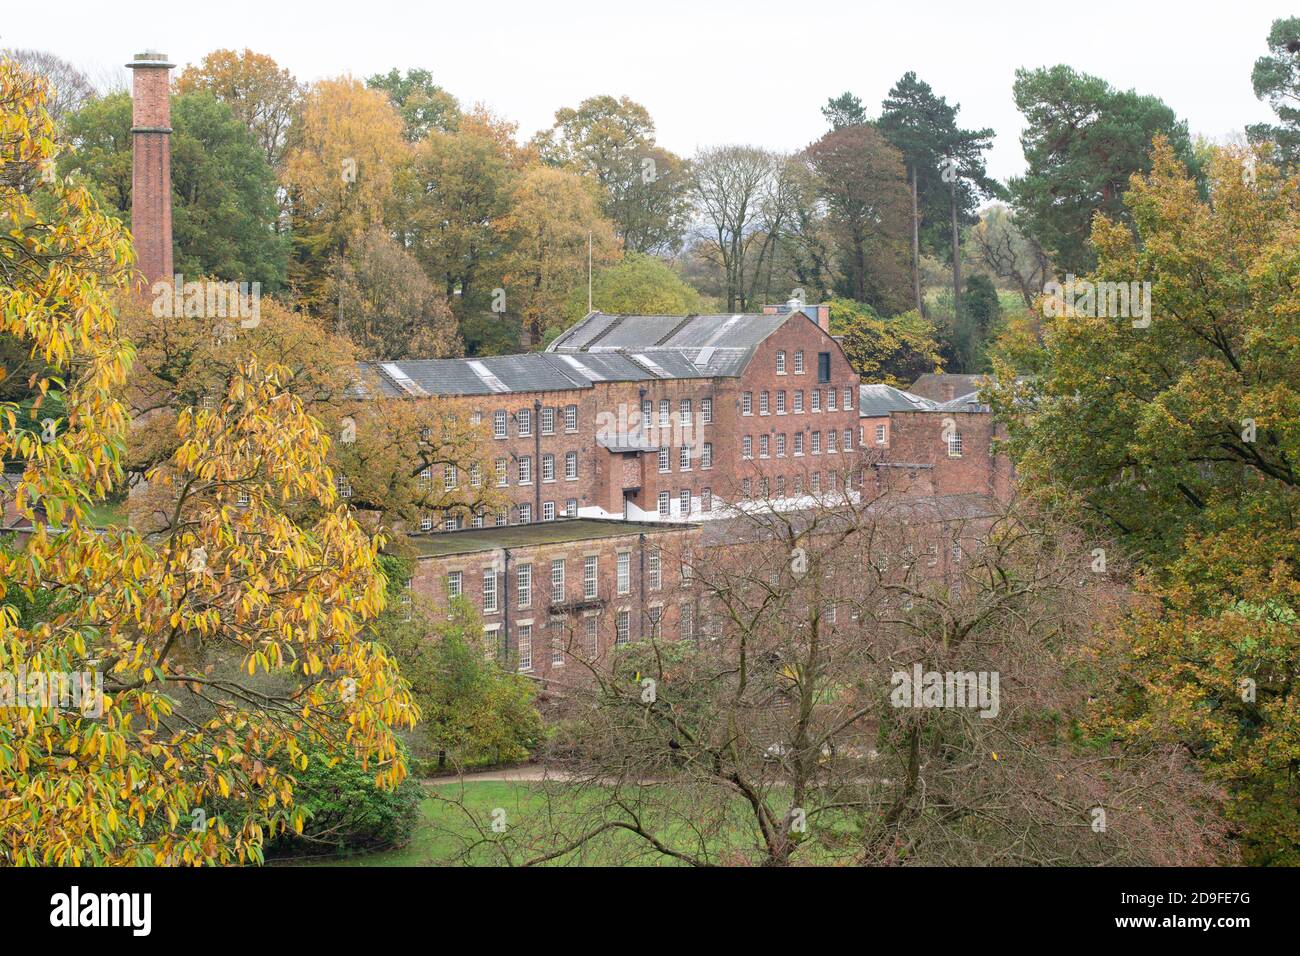 Quarry bank Mill historic cotton mill 1784 , Styal, Cheshire, UK. Autumn day looking through trees Stock Photo